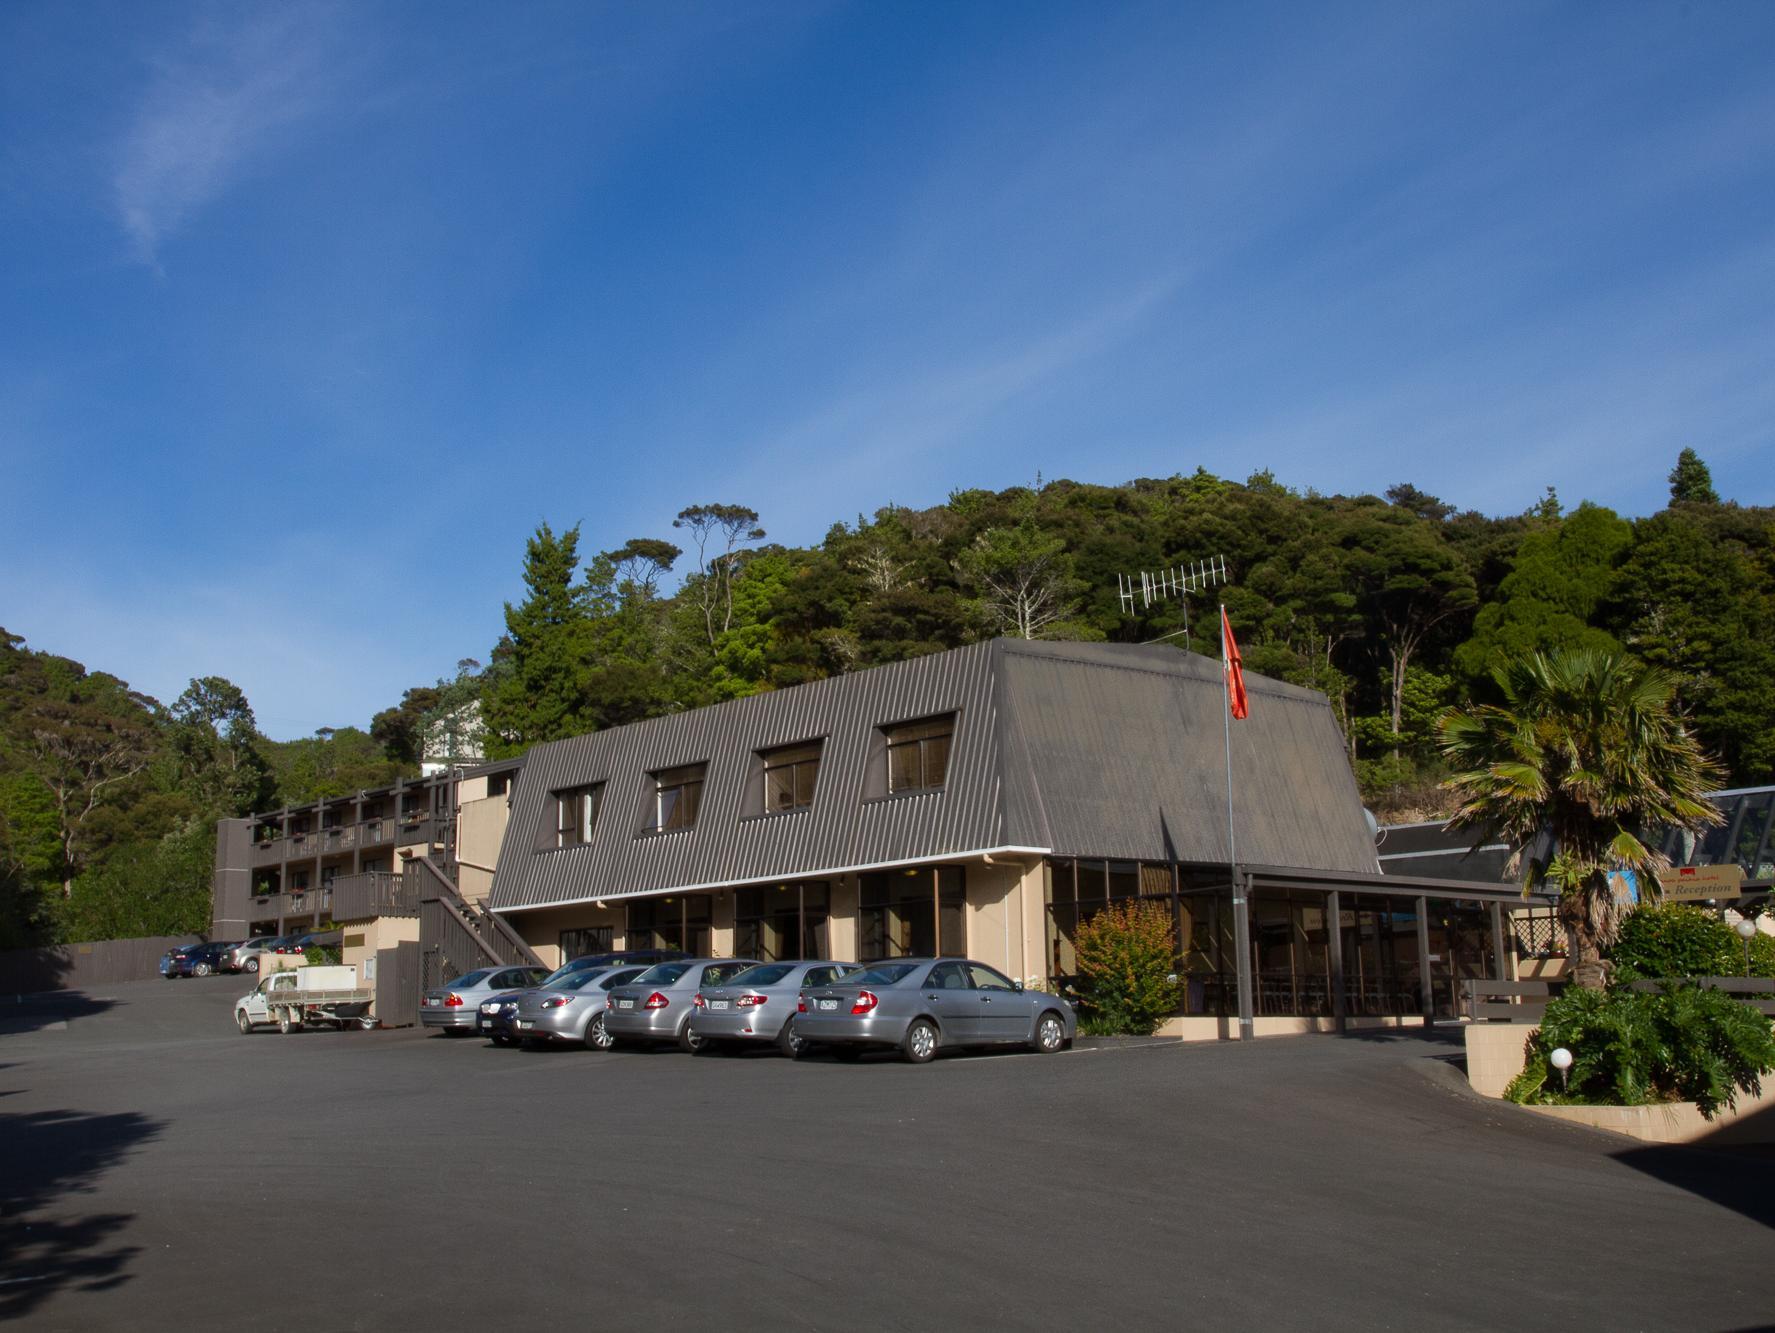 Tanoa Paihia Hotel New Zealand FAQ 2017, What facilities are there in Tanoa Paihia Hotel New Zealand 2017, What Languages Spoken are Supported in Tanoa Paihia Hotel New Zealand 2017, Which payment cards are accepted in Tanoa Paihia Hotel New Zealand , New Zealand Tanoa Paihia Hotel room facilities and services Q&A 2017, New Zealand Tanoa Paihia Hotel online booking services 2017, New Zealand Tanoa Paihia Hotel address 2017, New Zealand Tanoa Paihia Hotel telephone number 2017,New Zealand Tanoa Paihia Hotel map 2017, New Zealand Tanoa Paihia Hotel traffic guide 2017, how to go New Zealand Tanoa Paihia Hotel, New Zealand Tanoa Paihia Hotel booking online 2017, New Zealand Tanoa Paihia Hotel room types 2017.